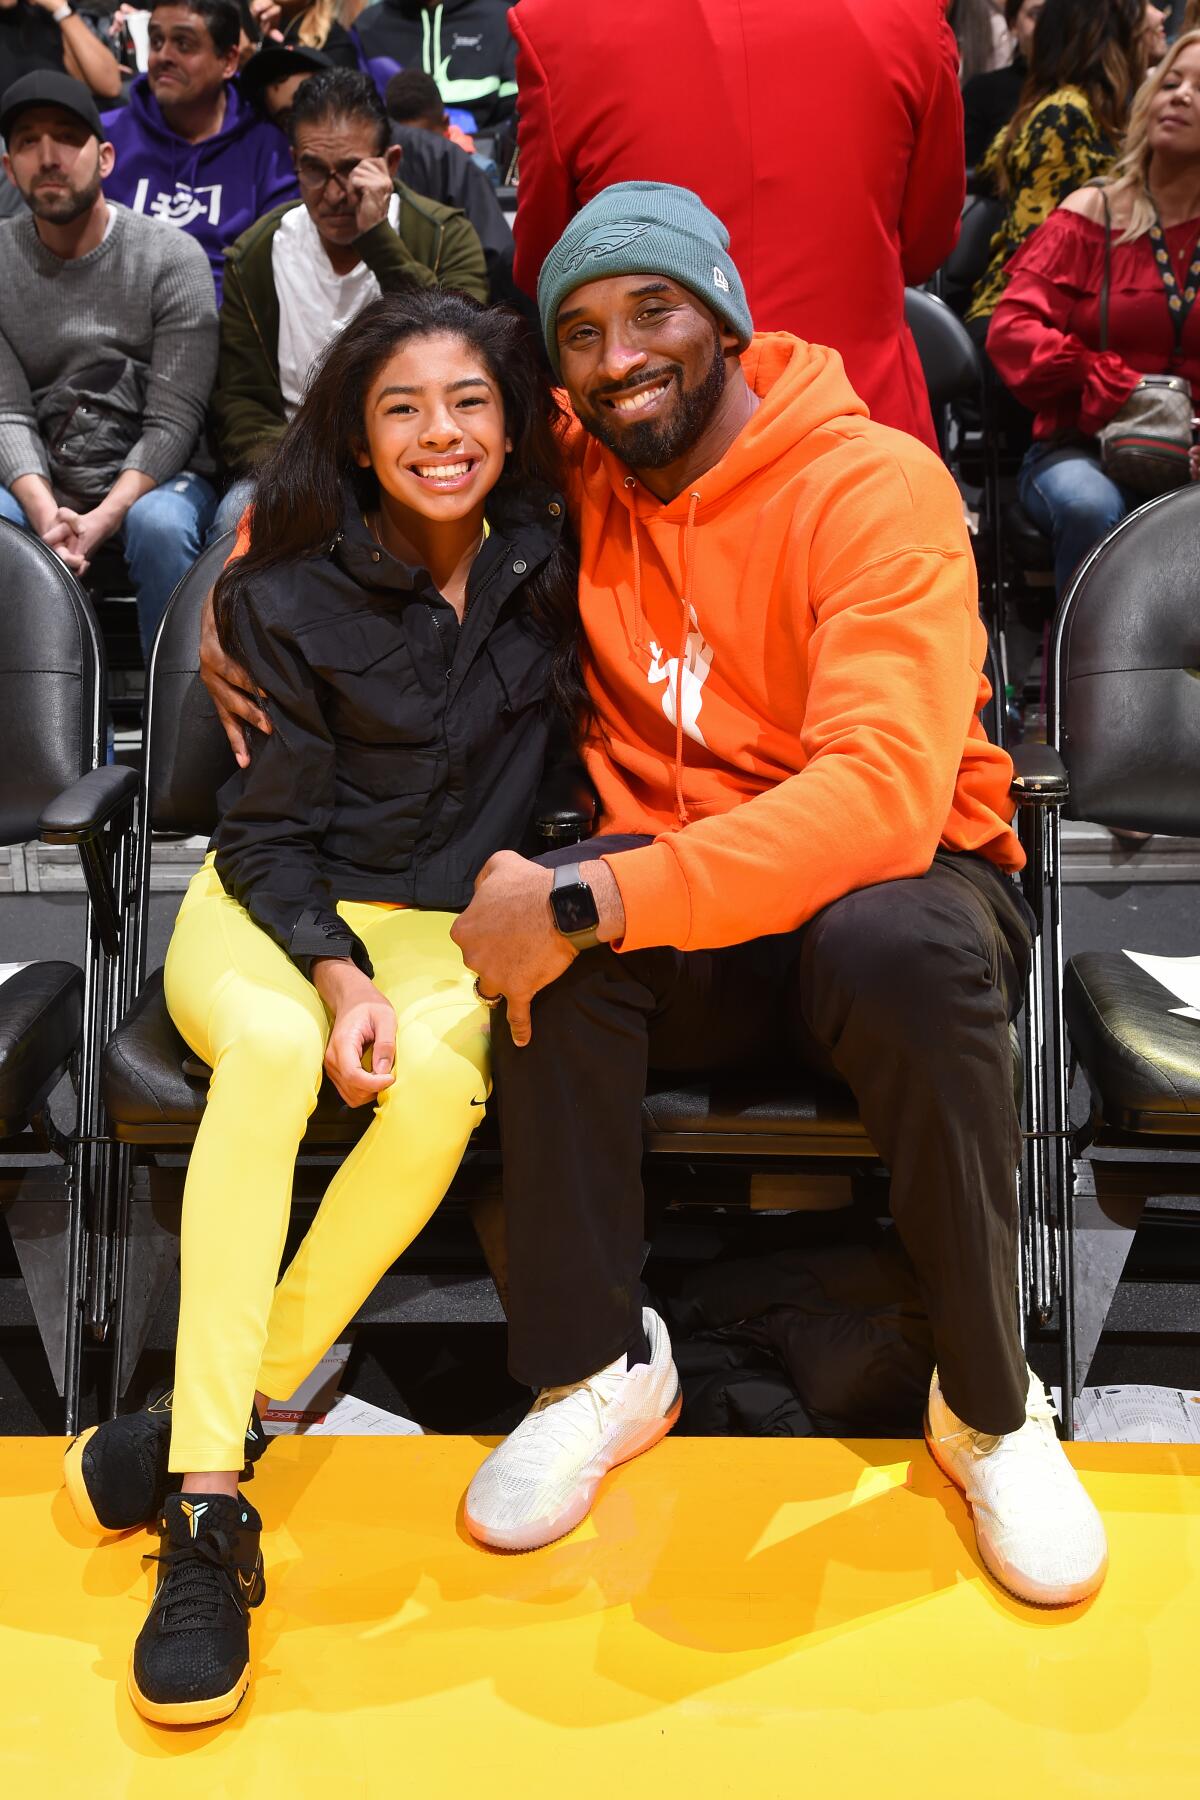 Kobe and Gianna Bryant attend a game between the Lakers and Dallas Mavericks on Dec. 29, 2019